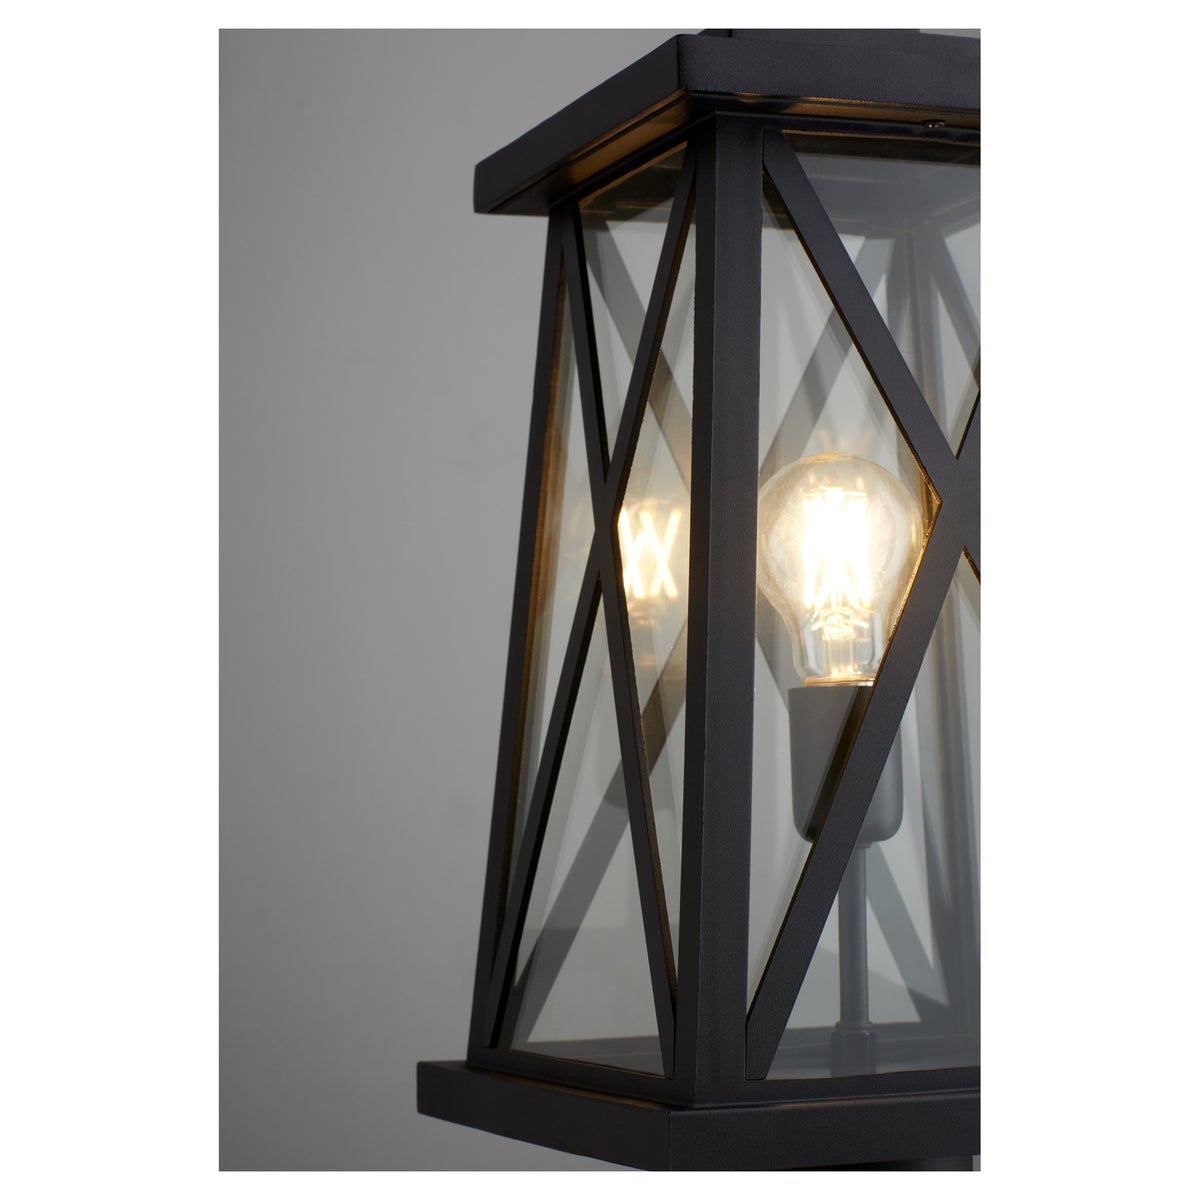 Black Outdoor Post Light with X-brace design, emitting warm glow. Enhance any outdoor space with timeless elegance. Brand: Quorum International.